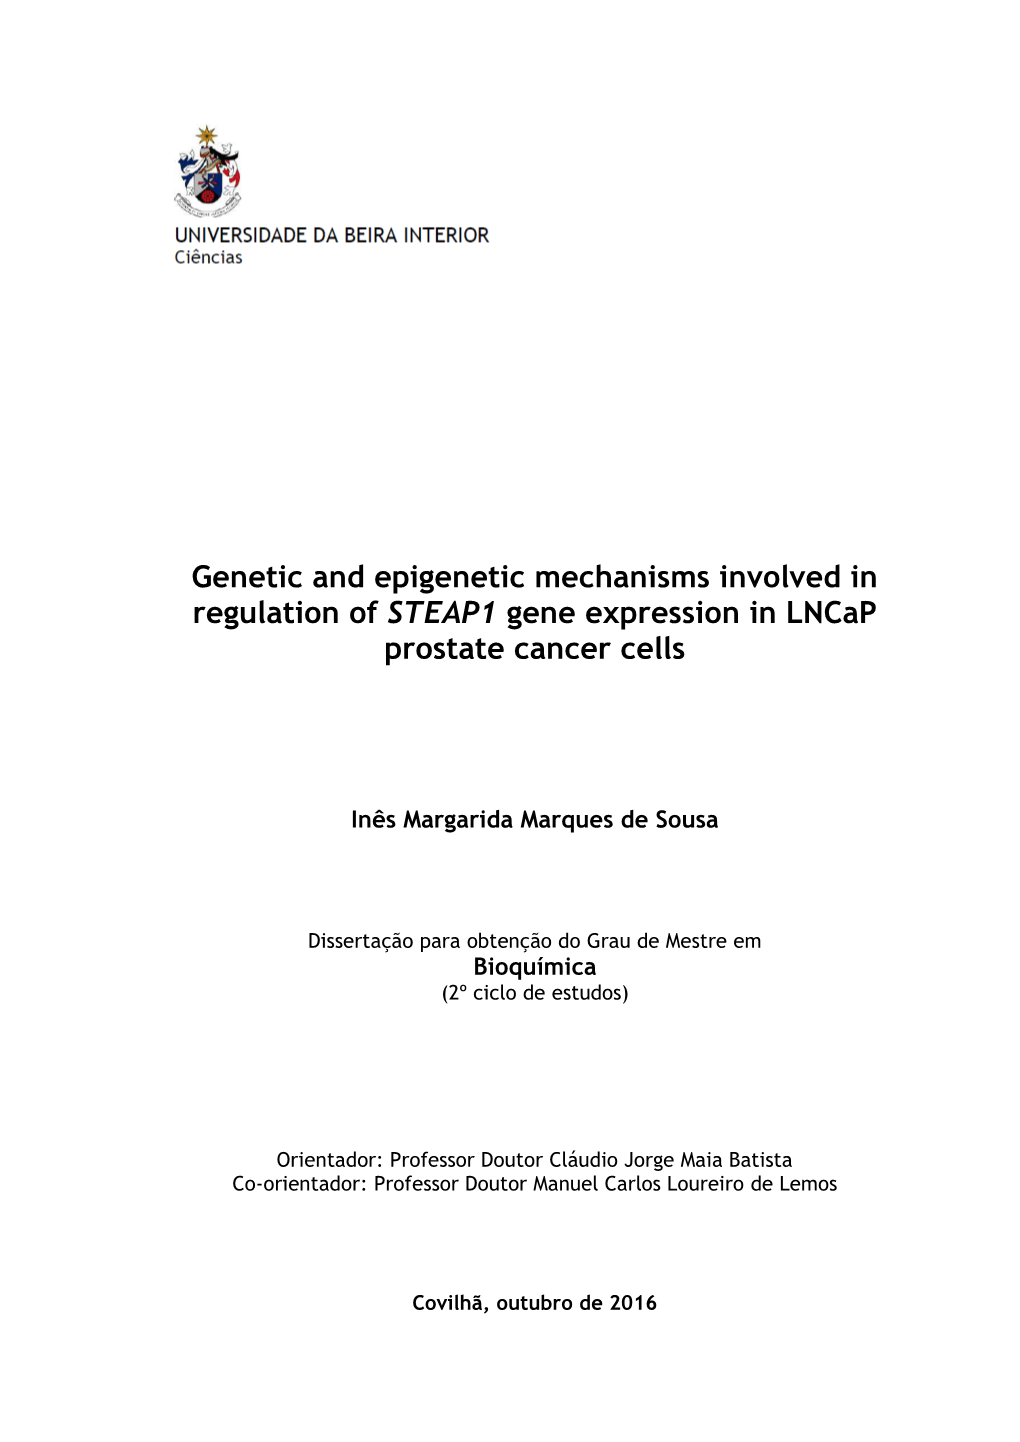 Genetic and Epigenetic Mechanisms Involved in Regulation of STEAP1 Gene Expression in Lncap Prostate Cancer Cells